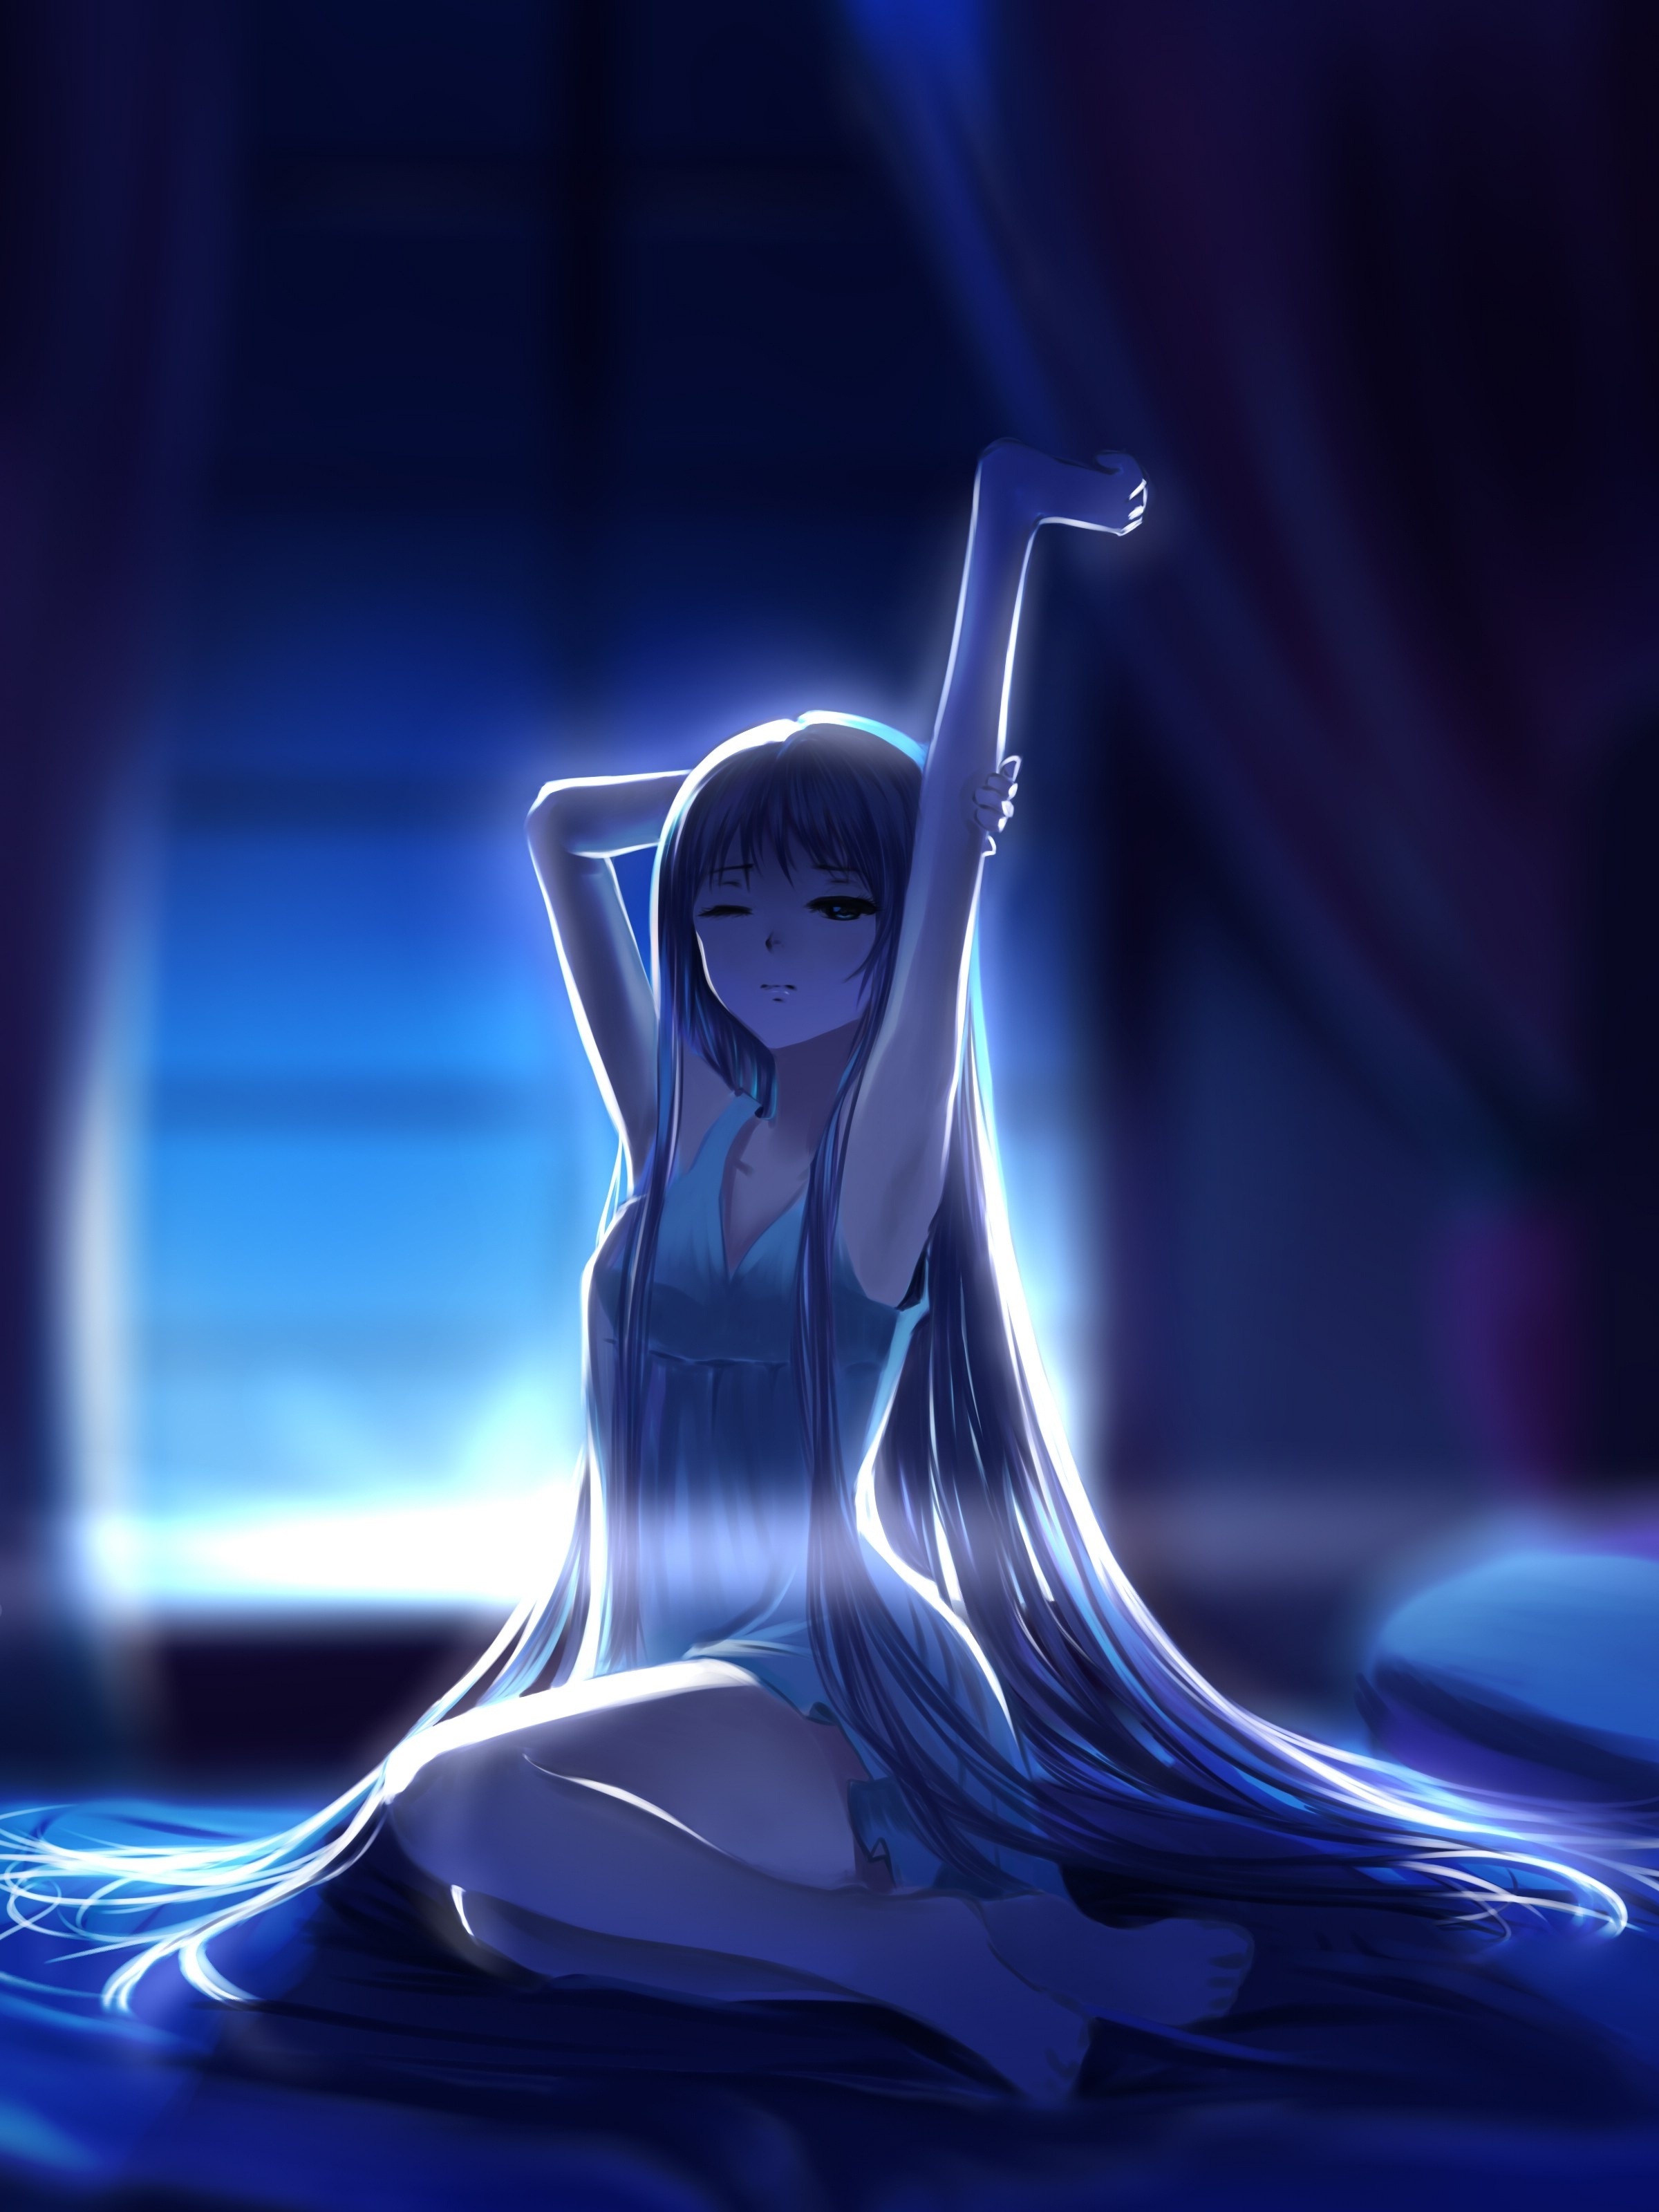 Share More Than 75 Anime Sleeping Wallpaper Best In Cdgdbentre